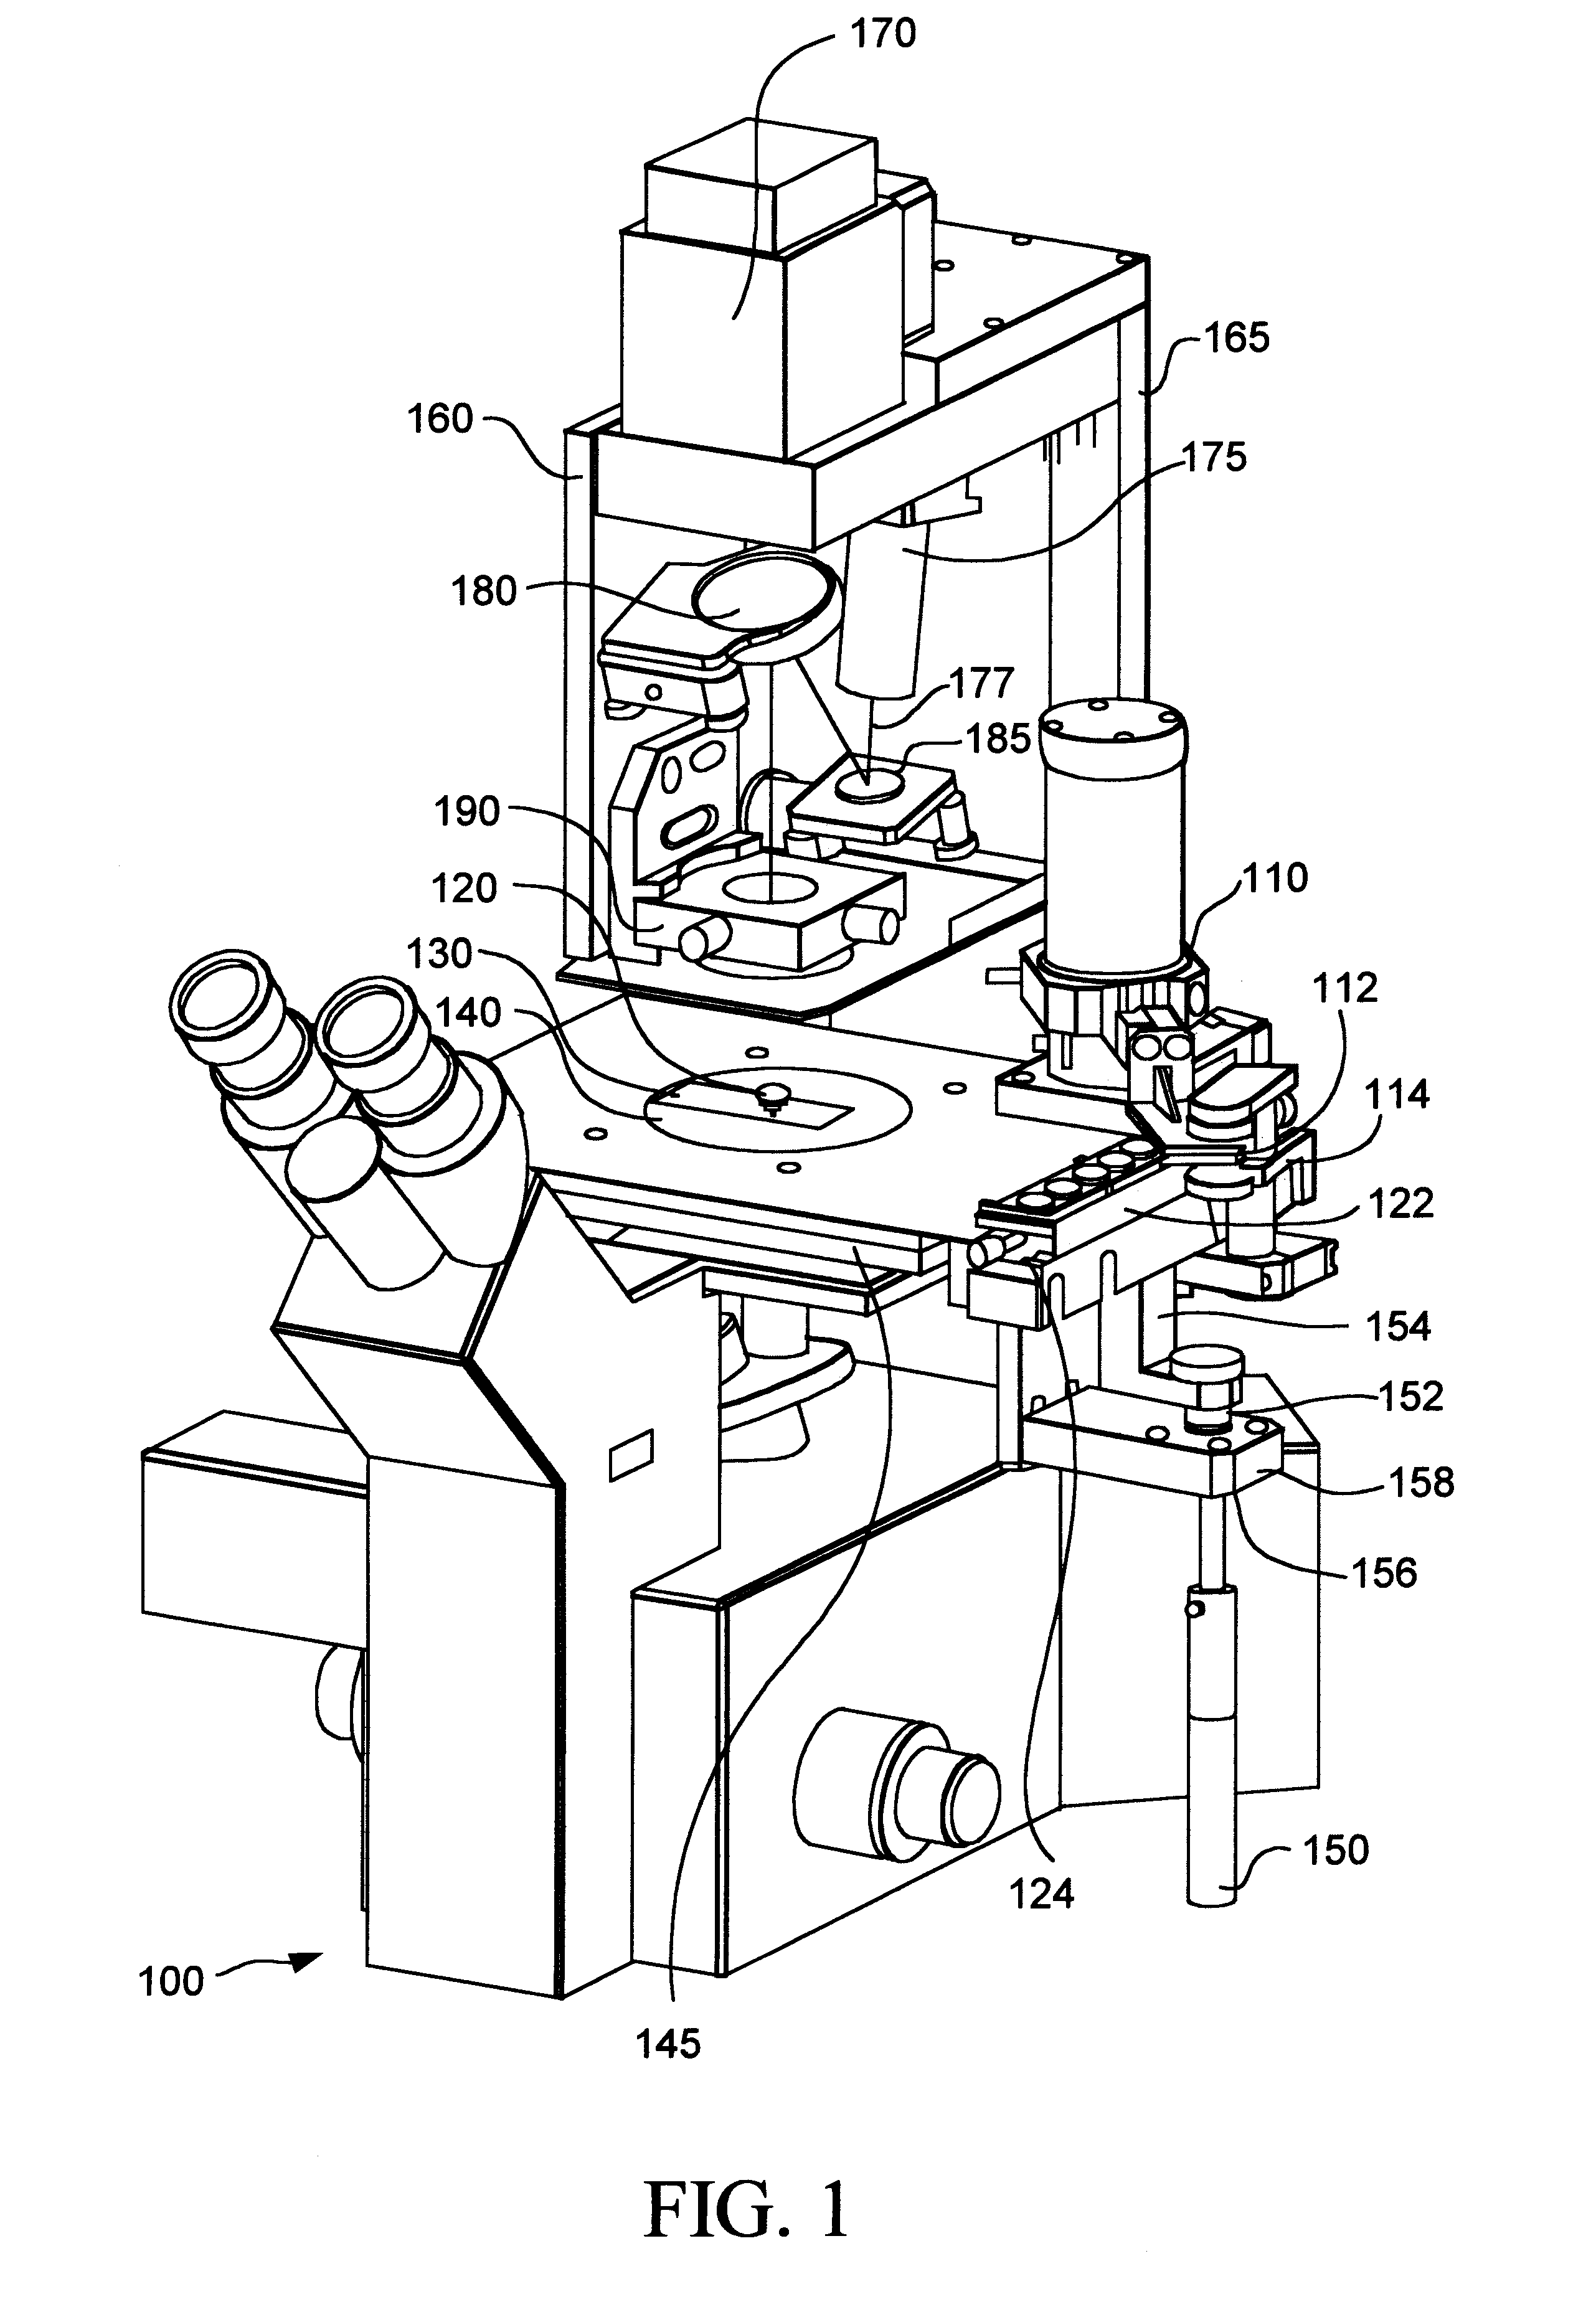 Laser capture microdissection pressure plate and transfer arm